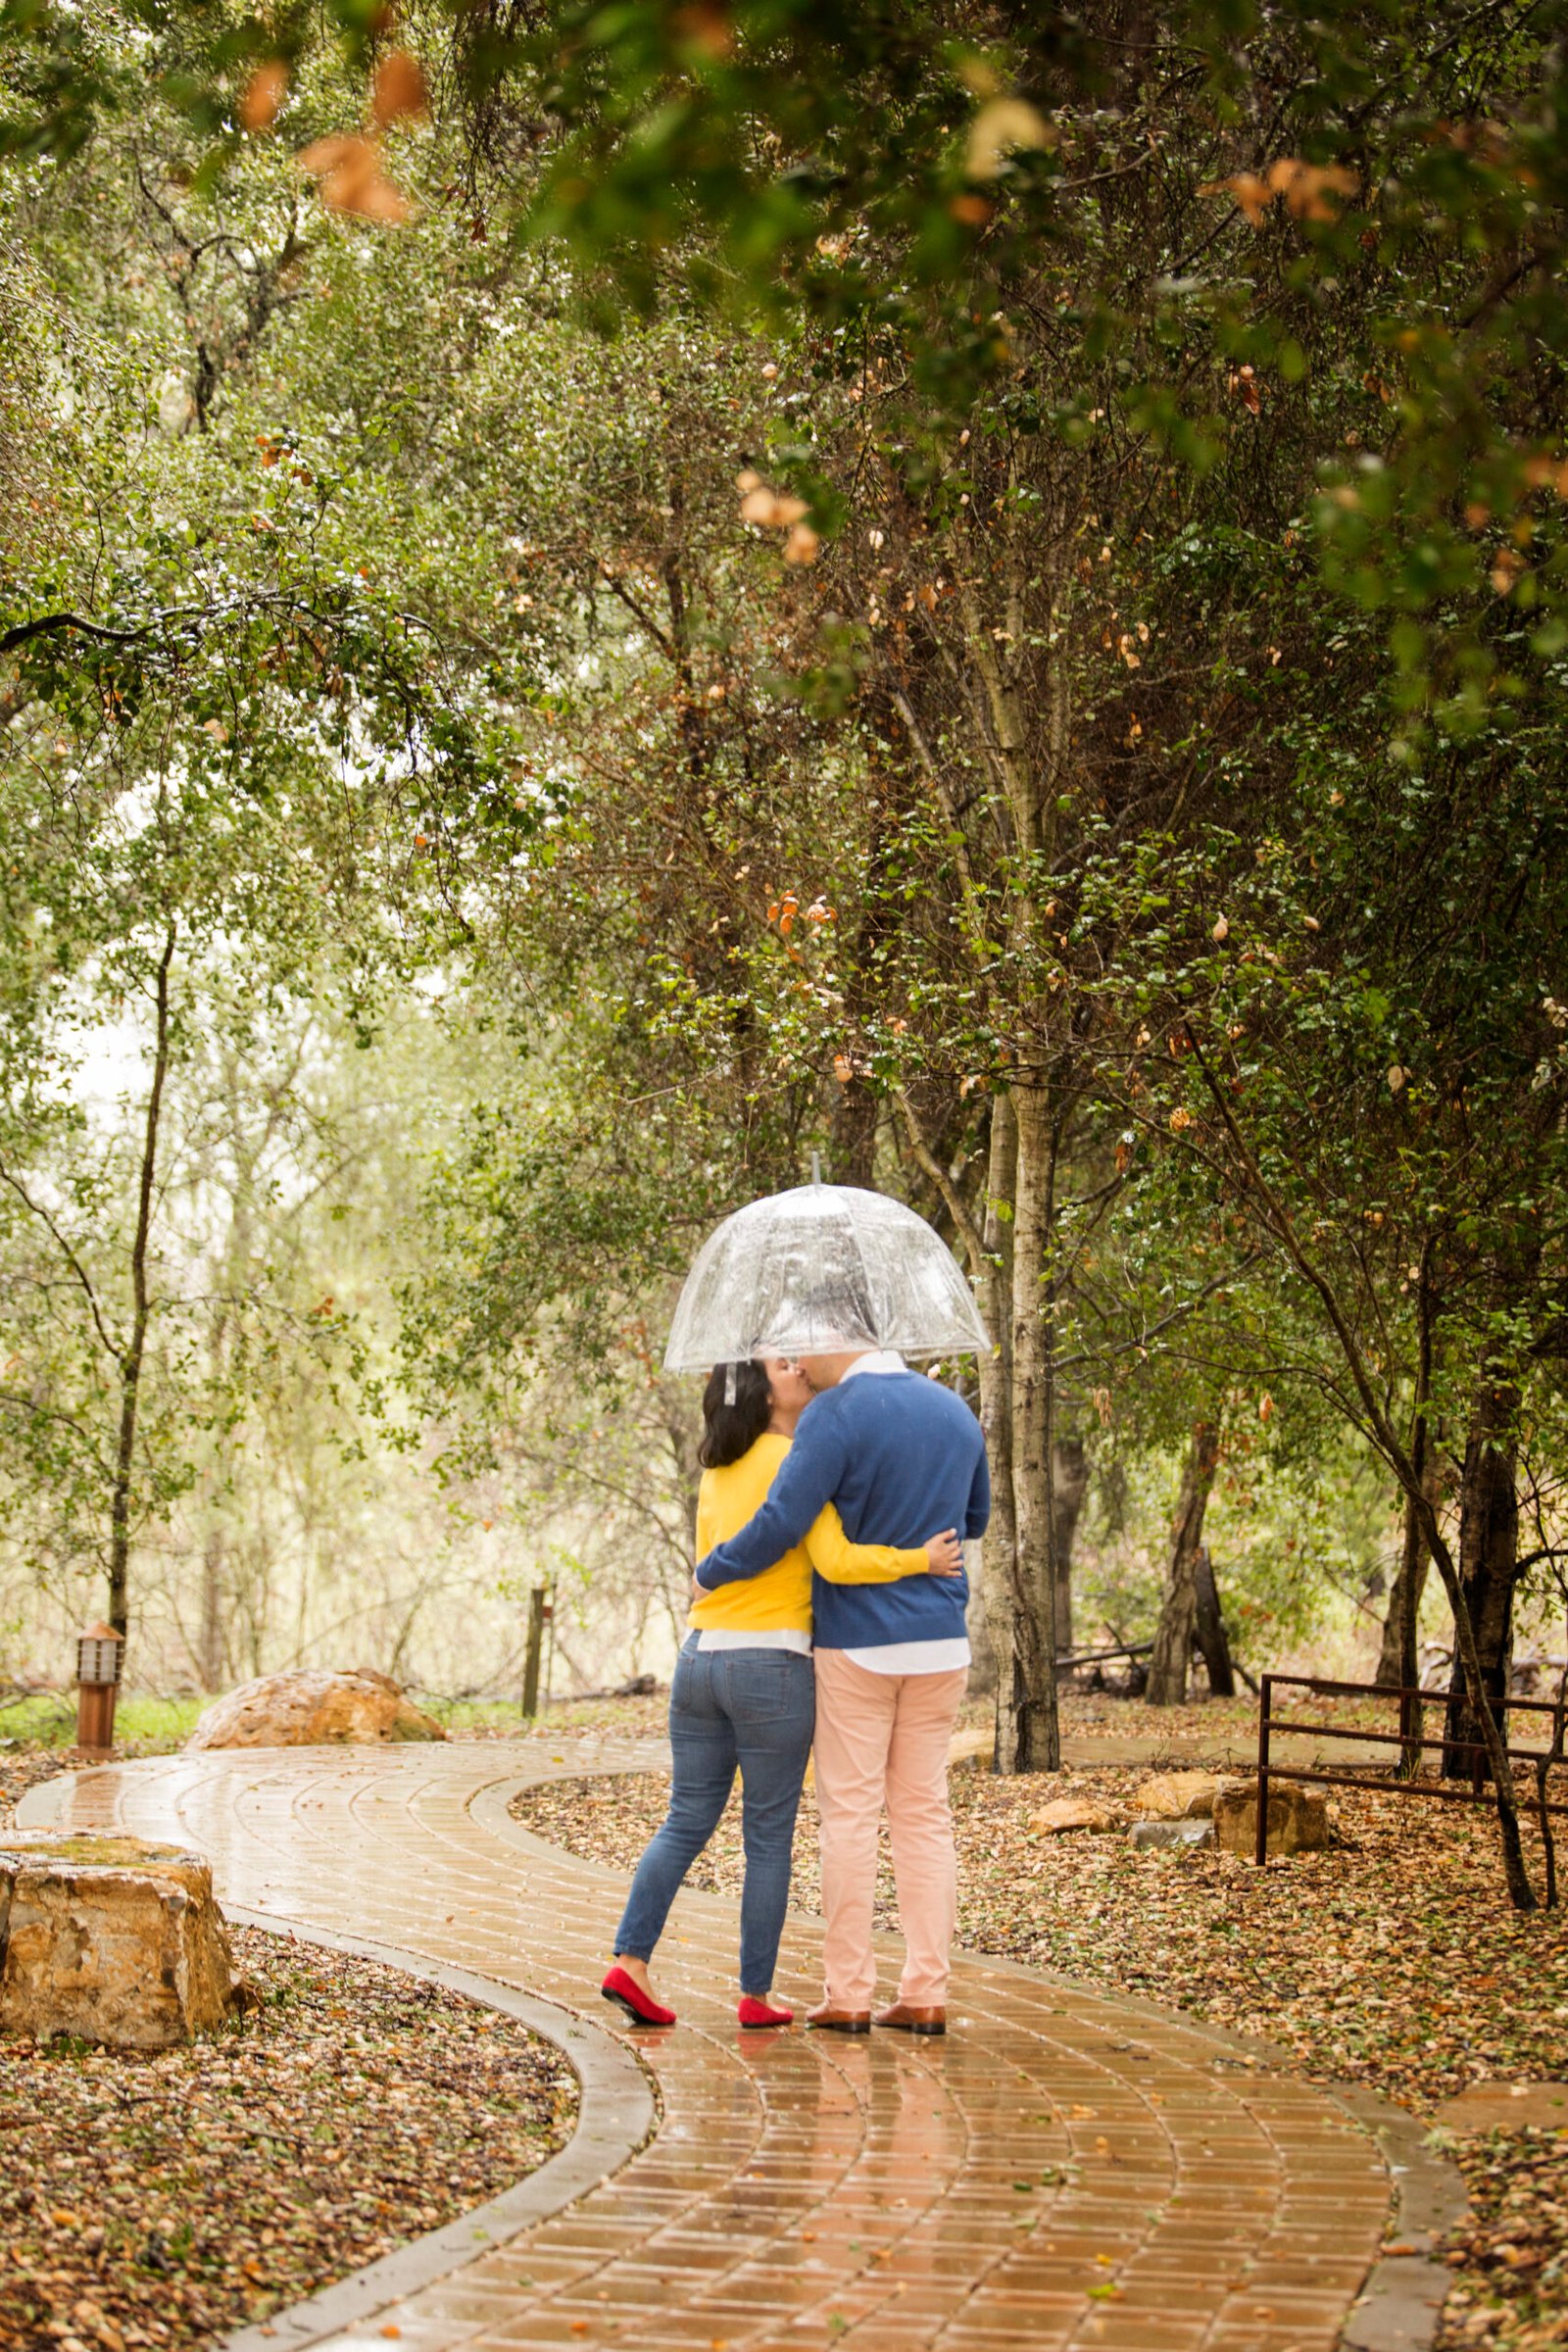 couple kissing under a clear umbrella on a paved path under oak trees